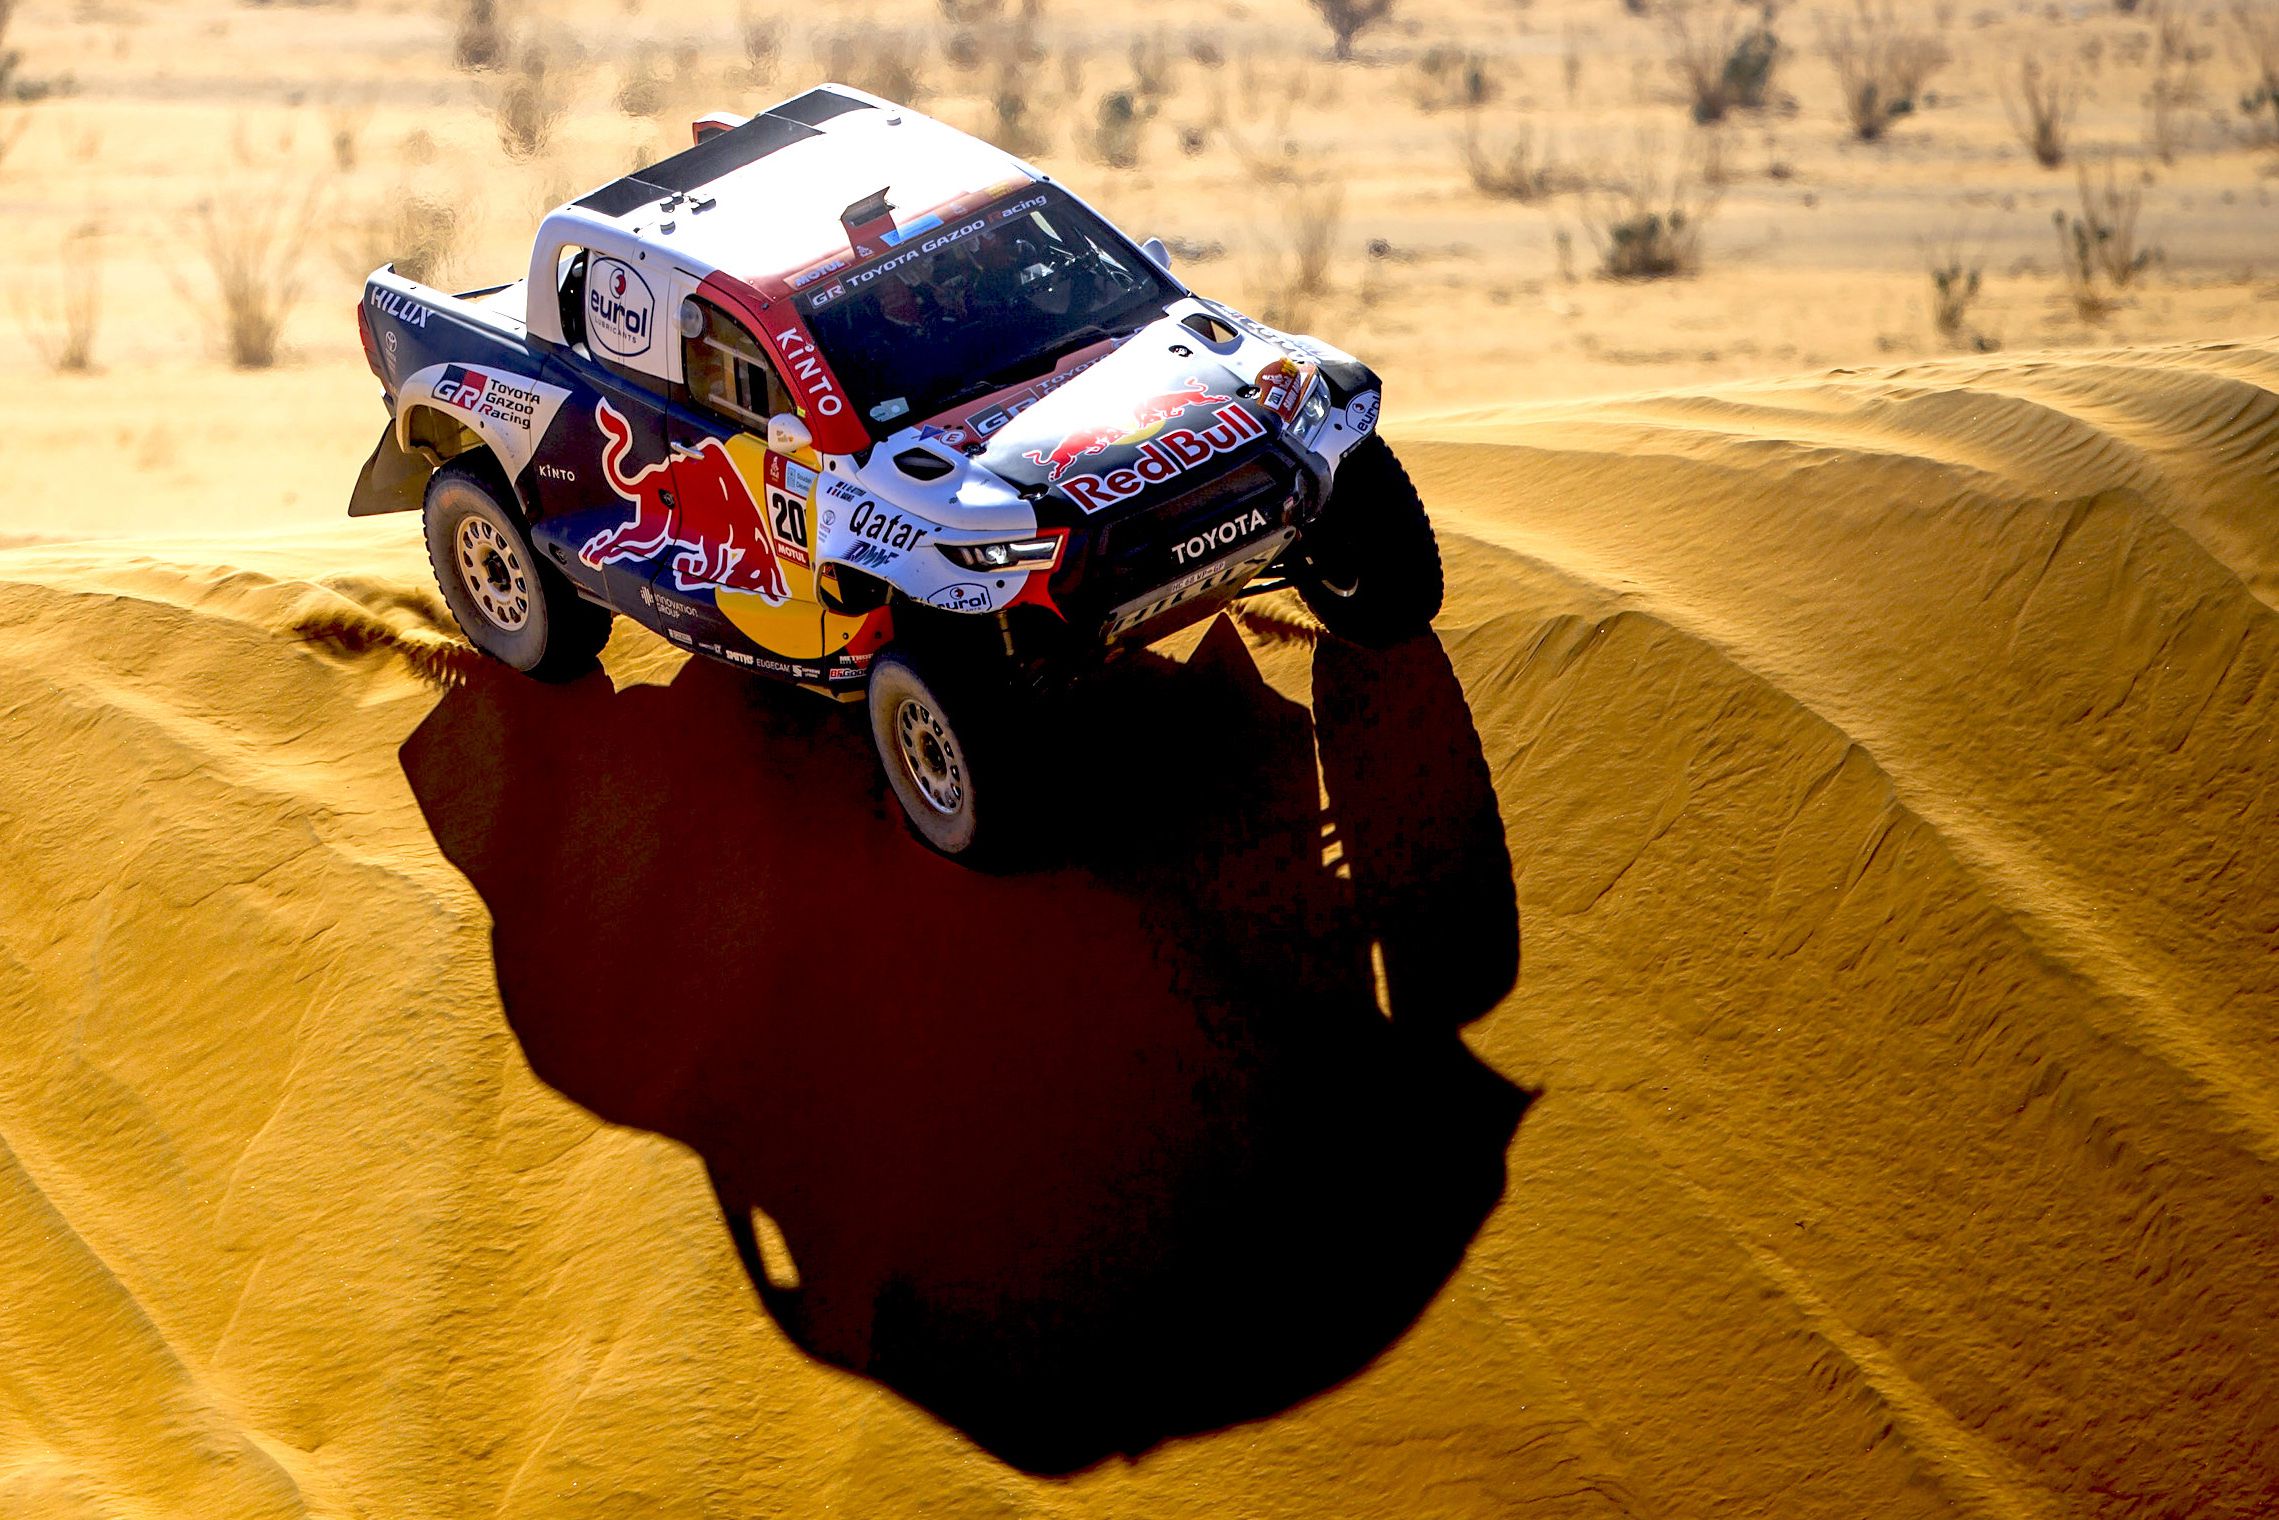 Colin-on-Cars -  Proudly SA Hilux 164 km away from victory as bike lead changes